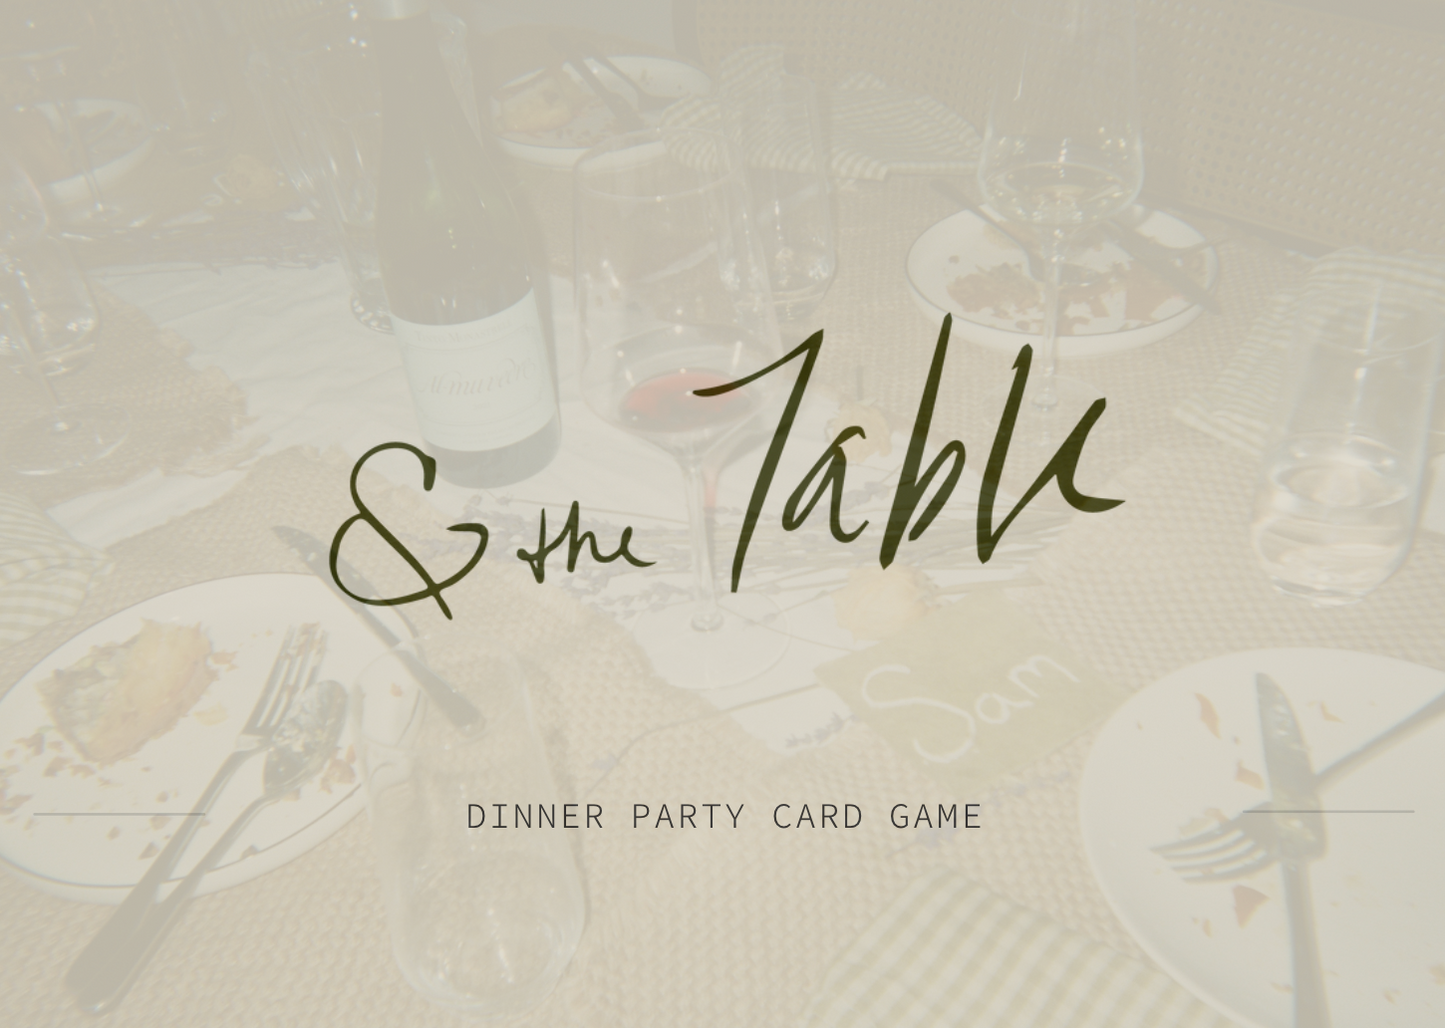 THE DINNER PARTY GAME PACK